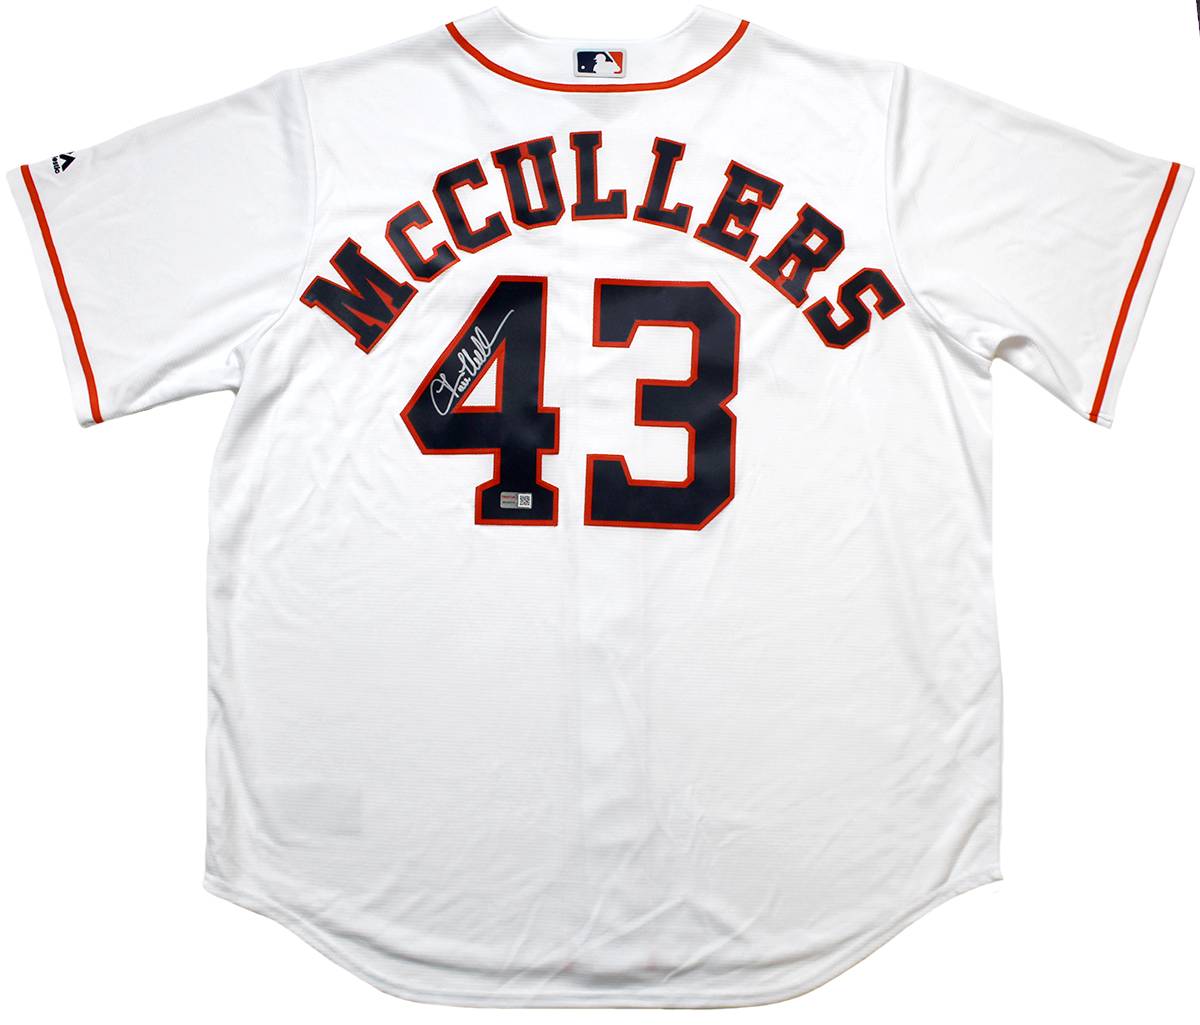 LANCE McCULLERS HAND SIGNED HOUSTON ASTROS JERSEY BAS BECKETT CERT #1